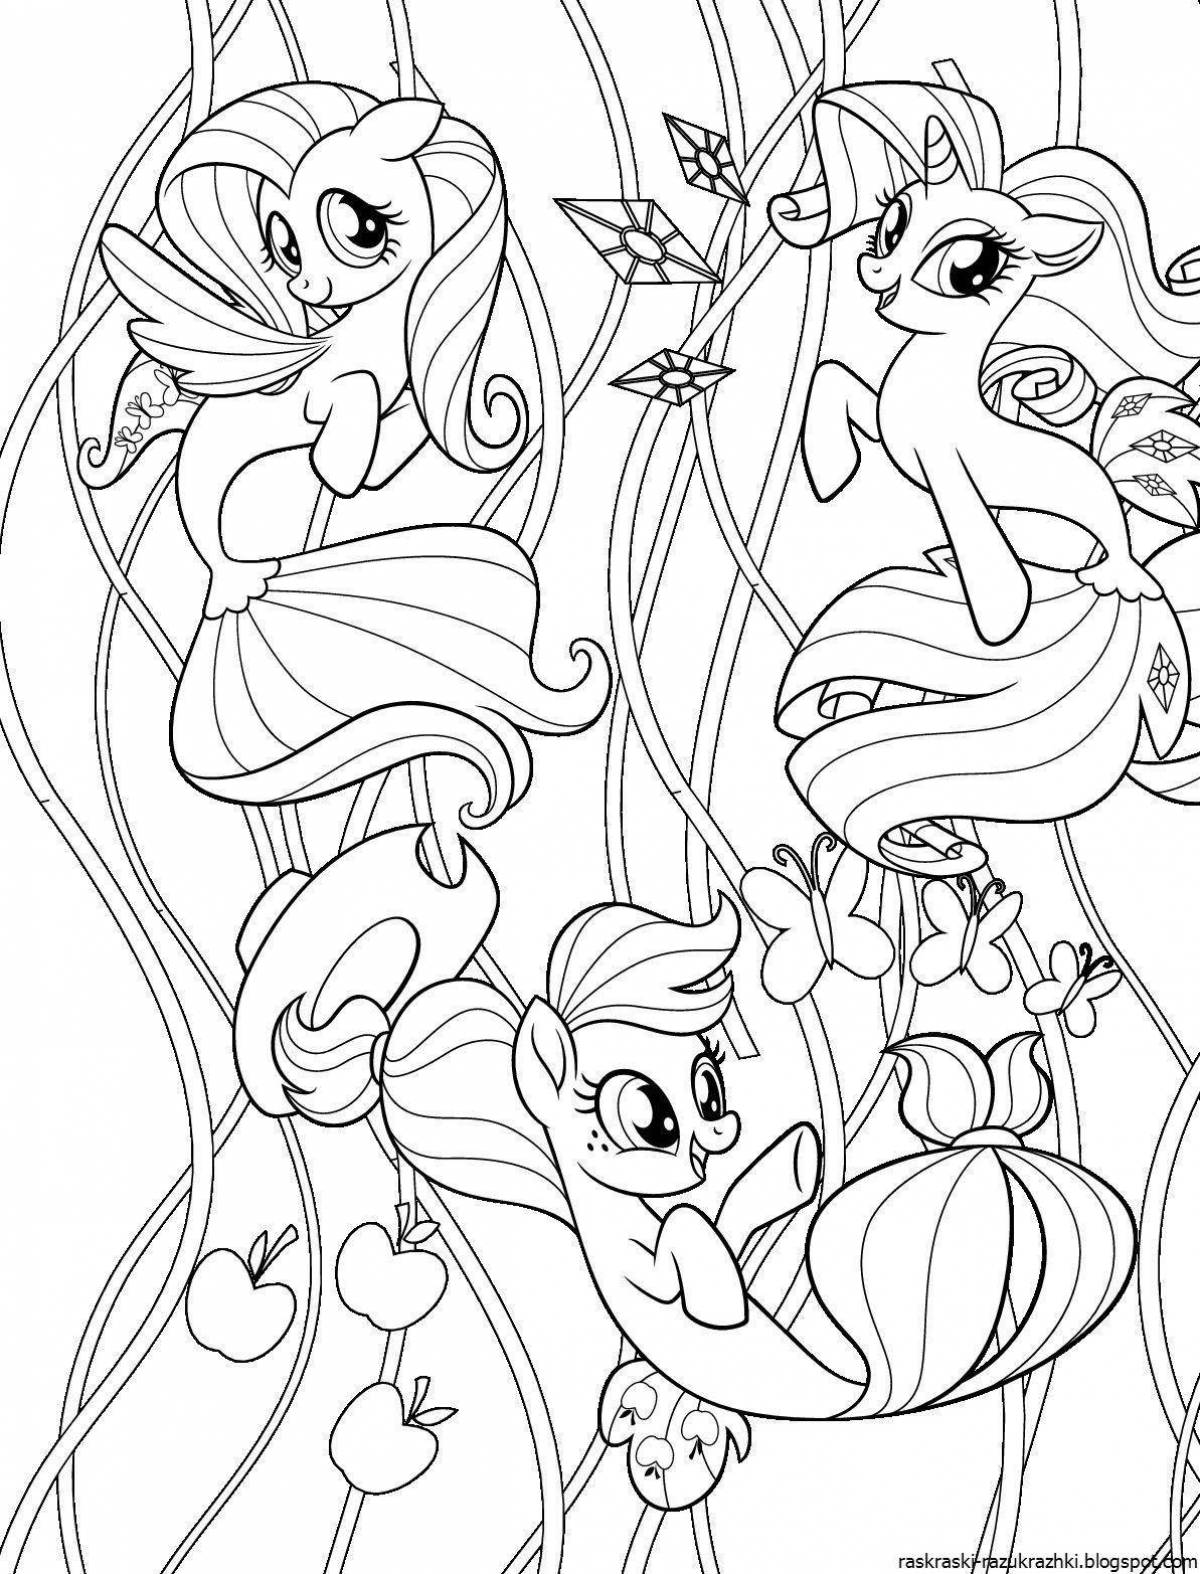 Amazing coloring pages of malital pony mermaids